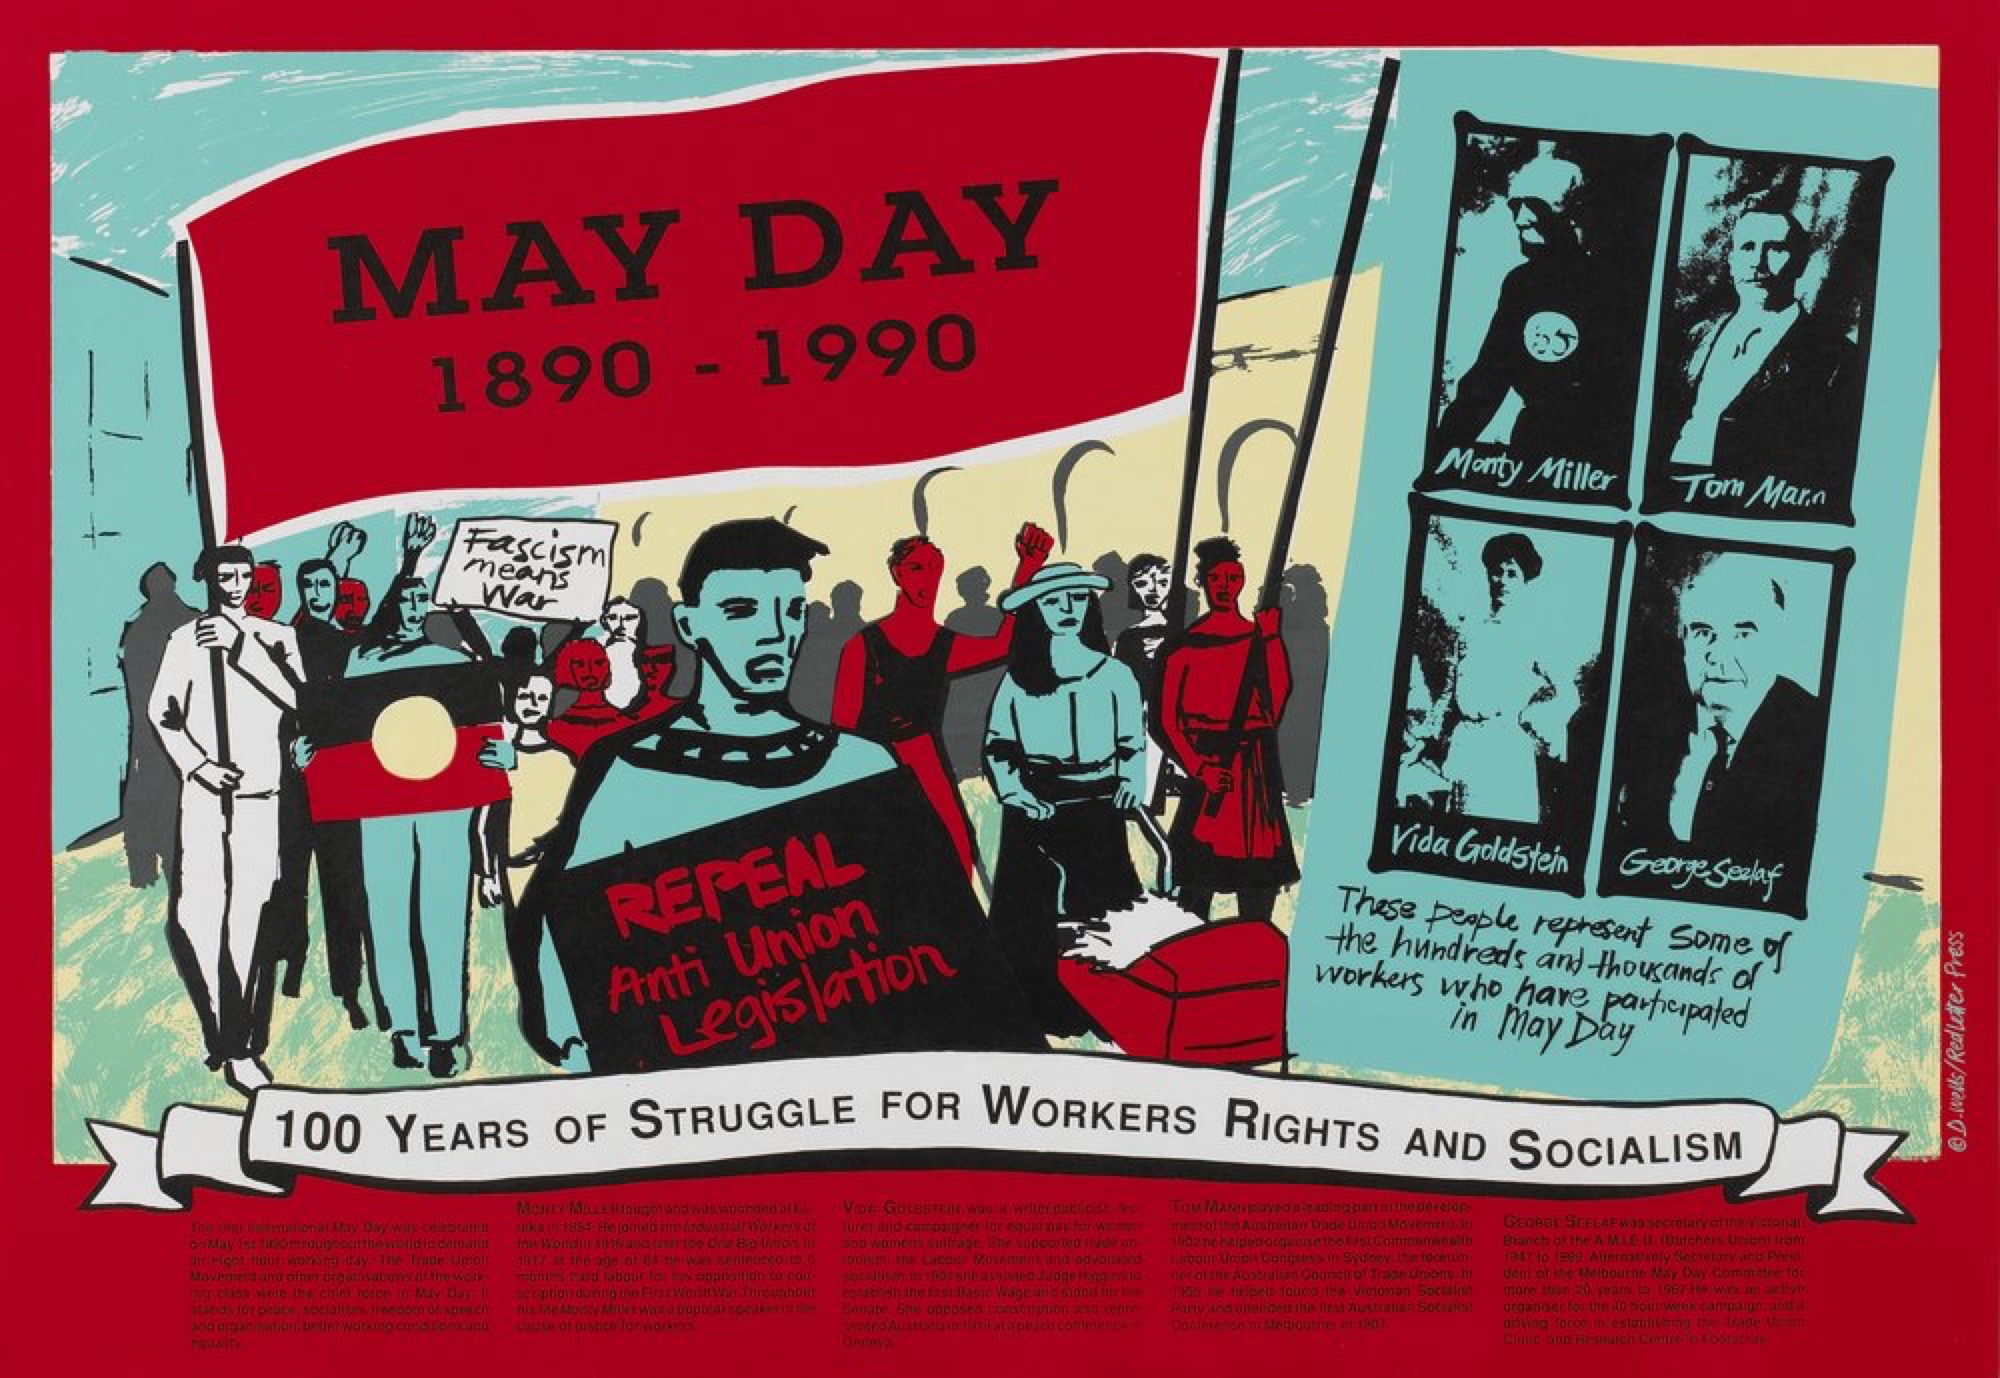 Dianna Wells <em>May Day 1890-1990. 100 years of struggle for workers rights and socialism</em>, 1990 colour screenprint.<br />
Courtesy of the State Library of Victoria